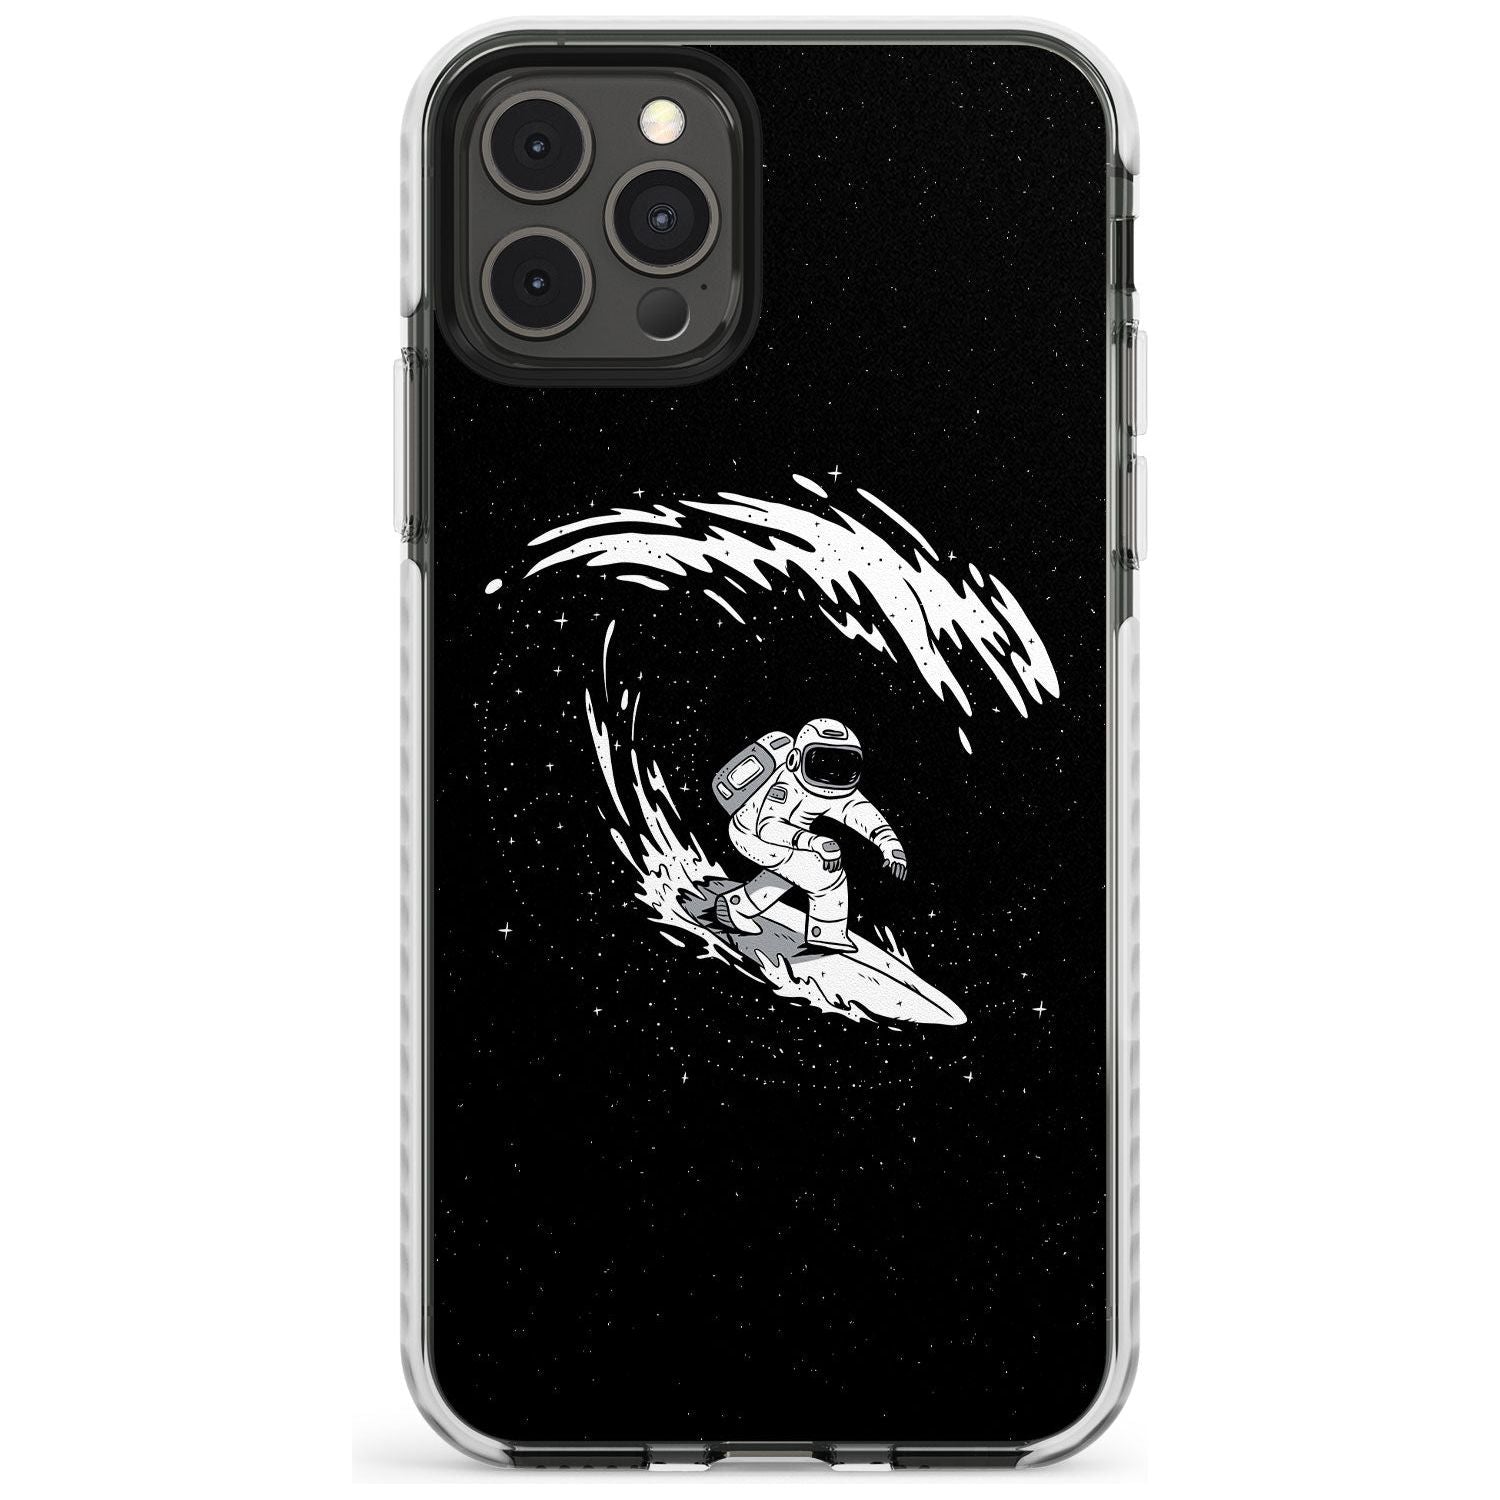 Surfing Astronaut Slim TPU Phone Case for iPhone 11 Pro Max